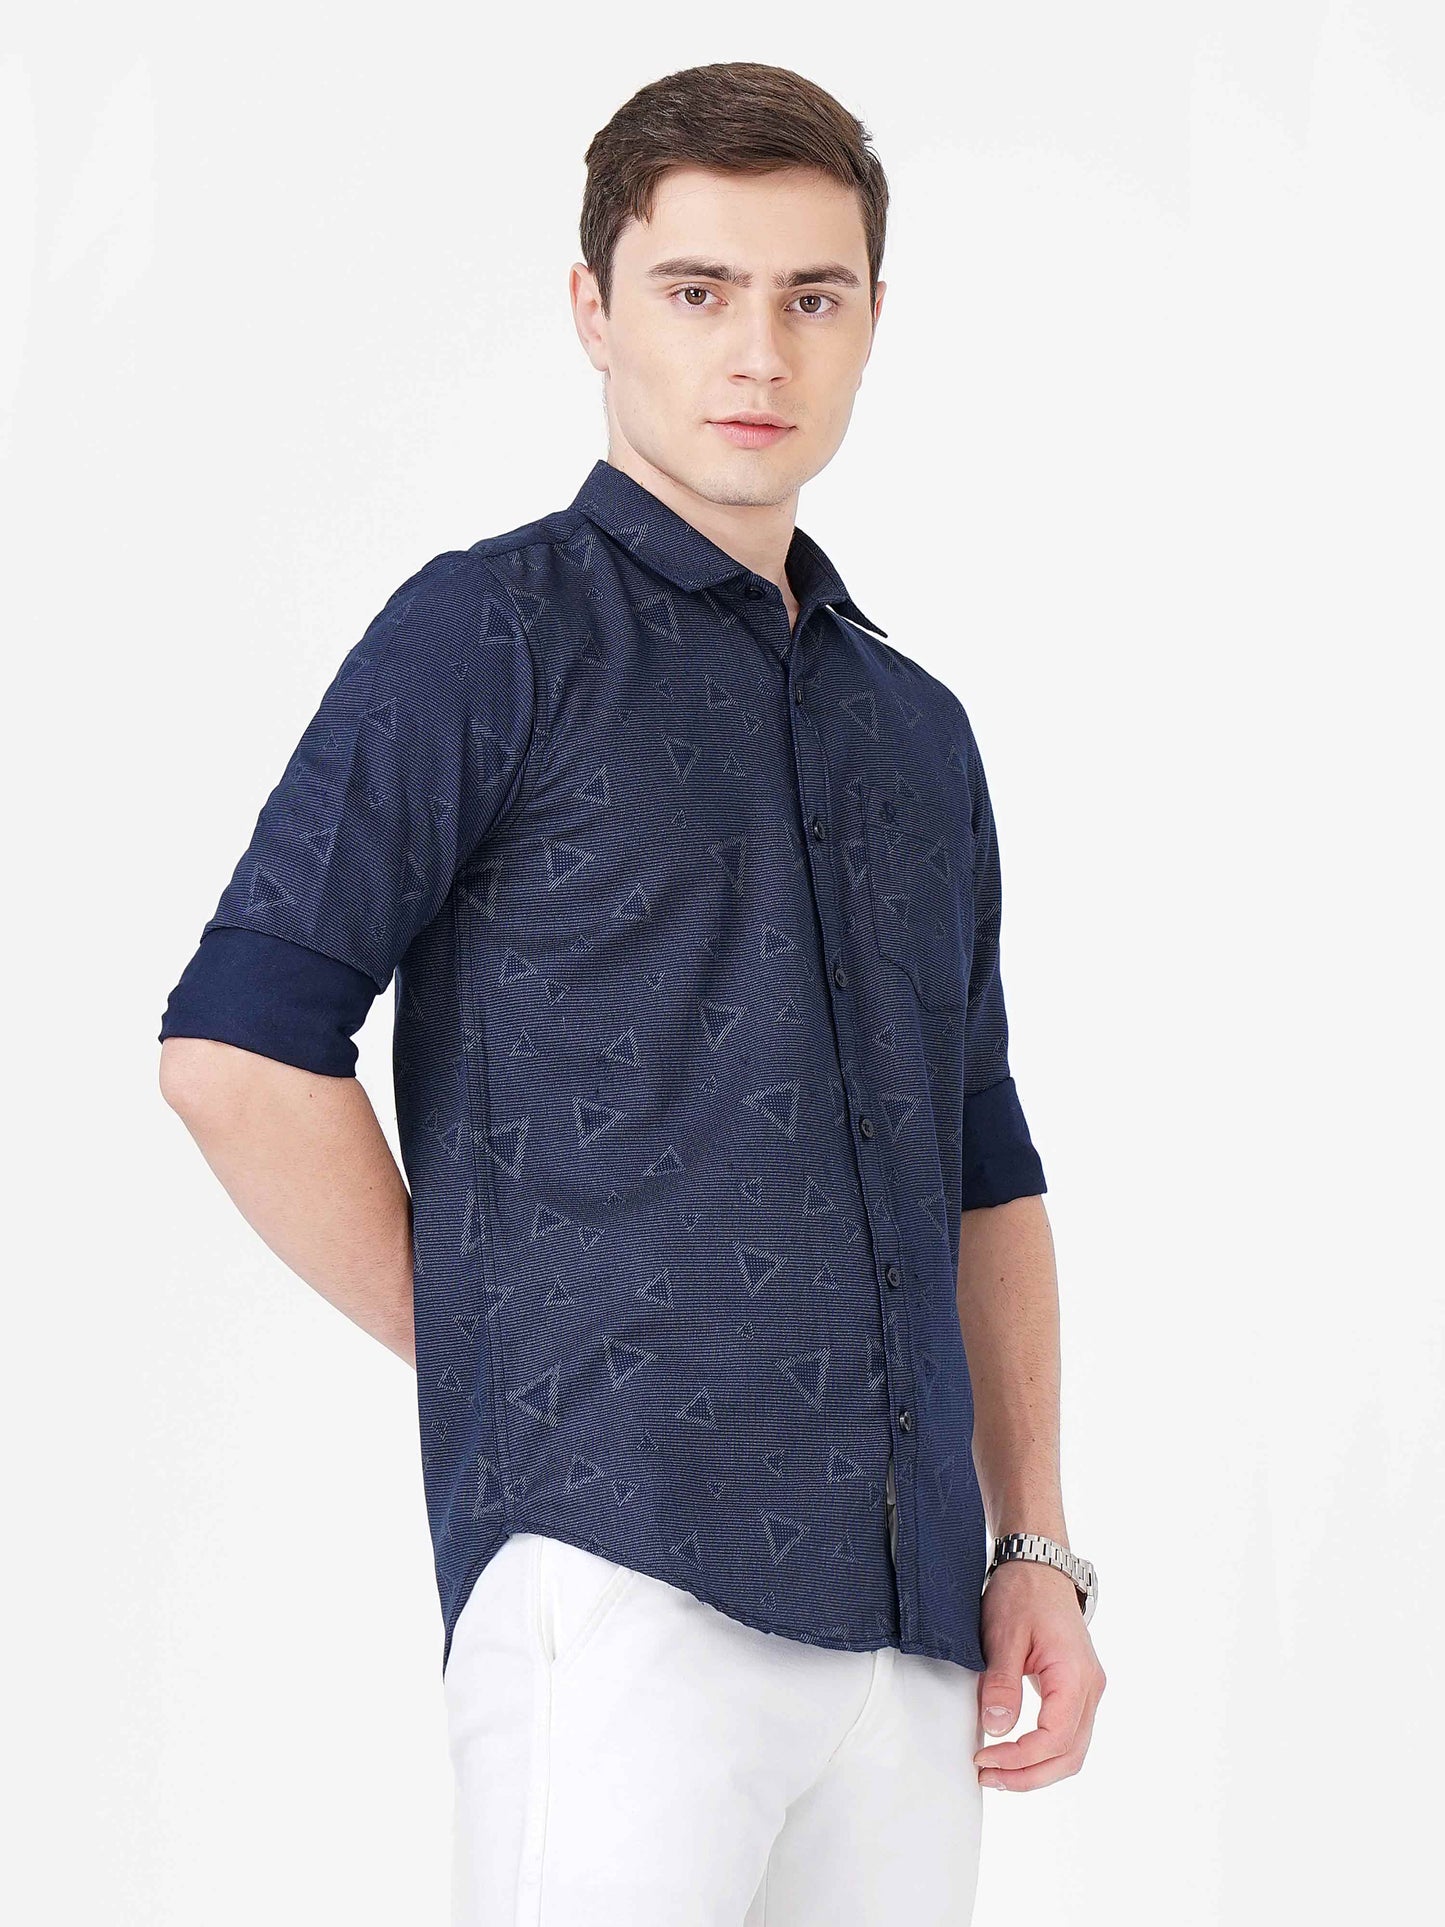 Triangle Printed Navy Shirt for Men 